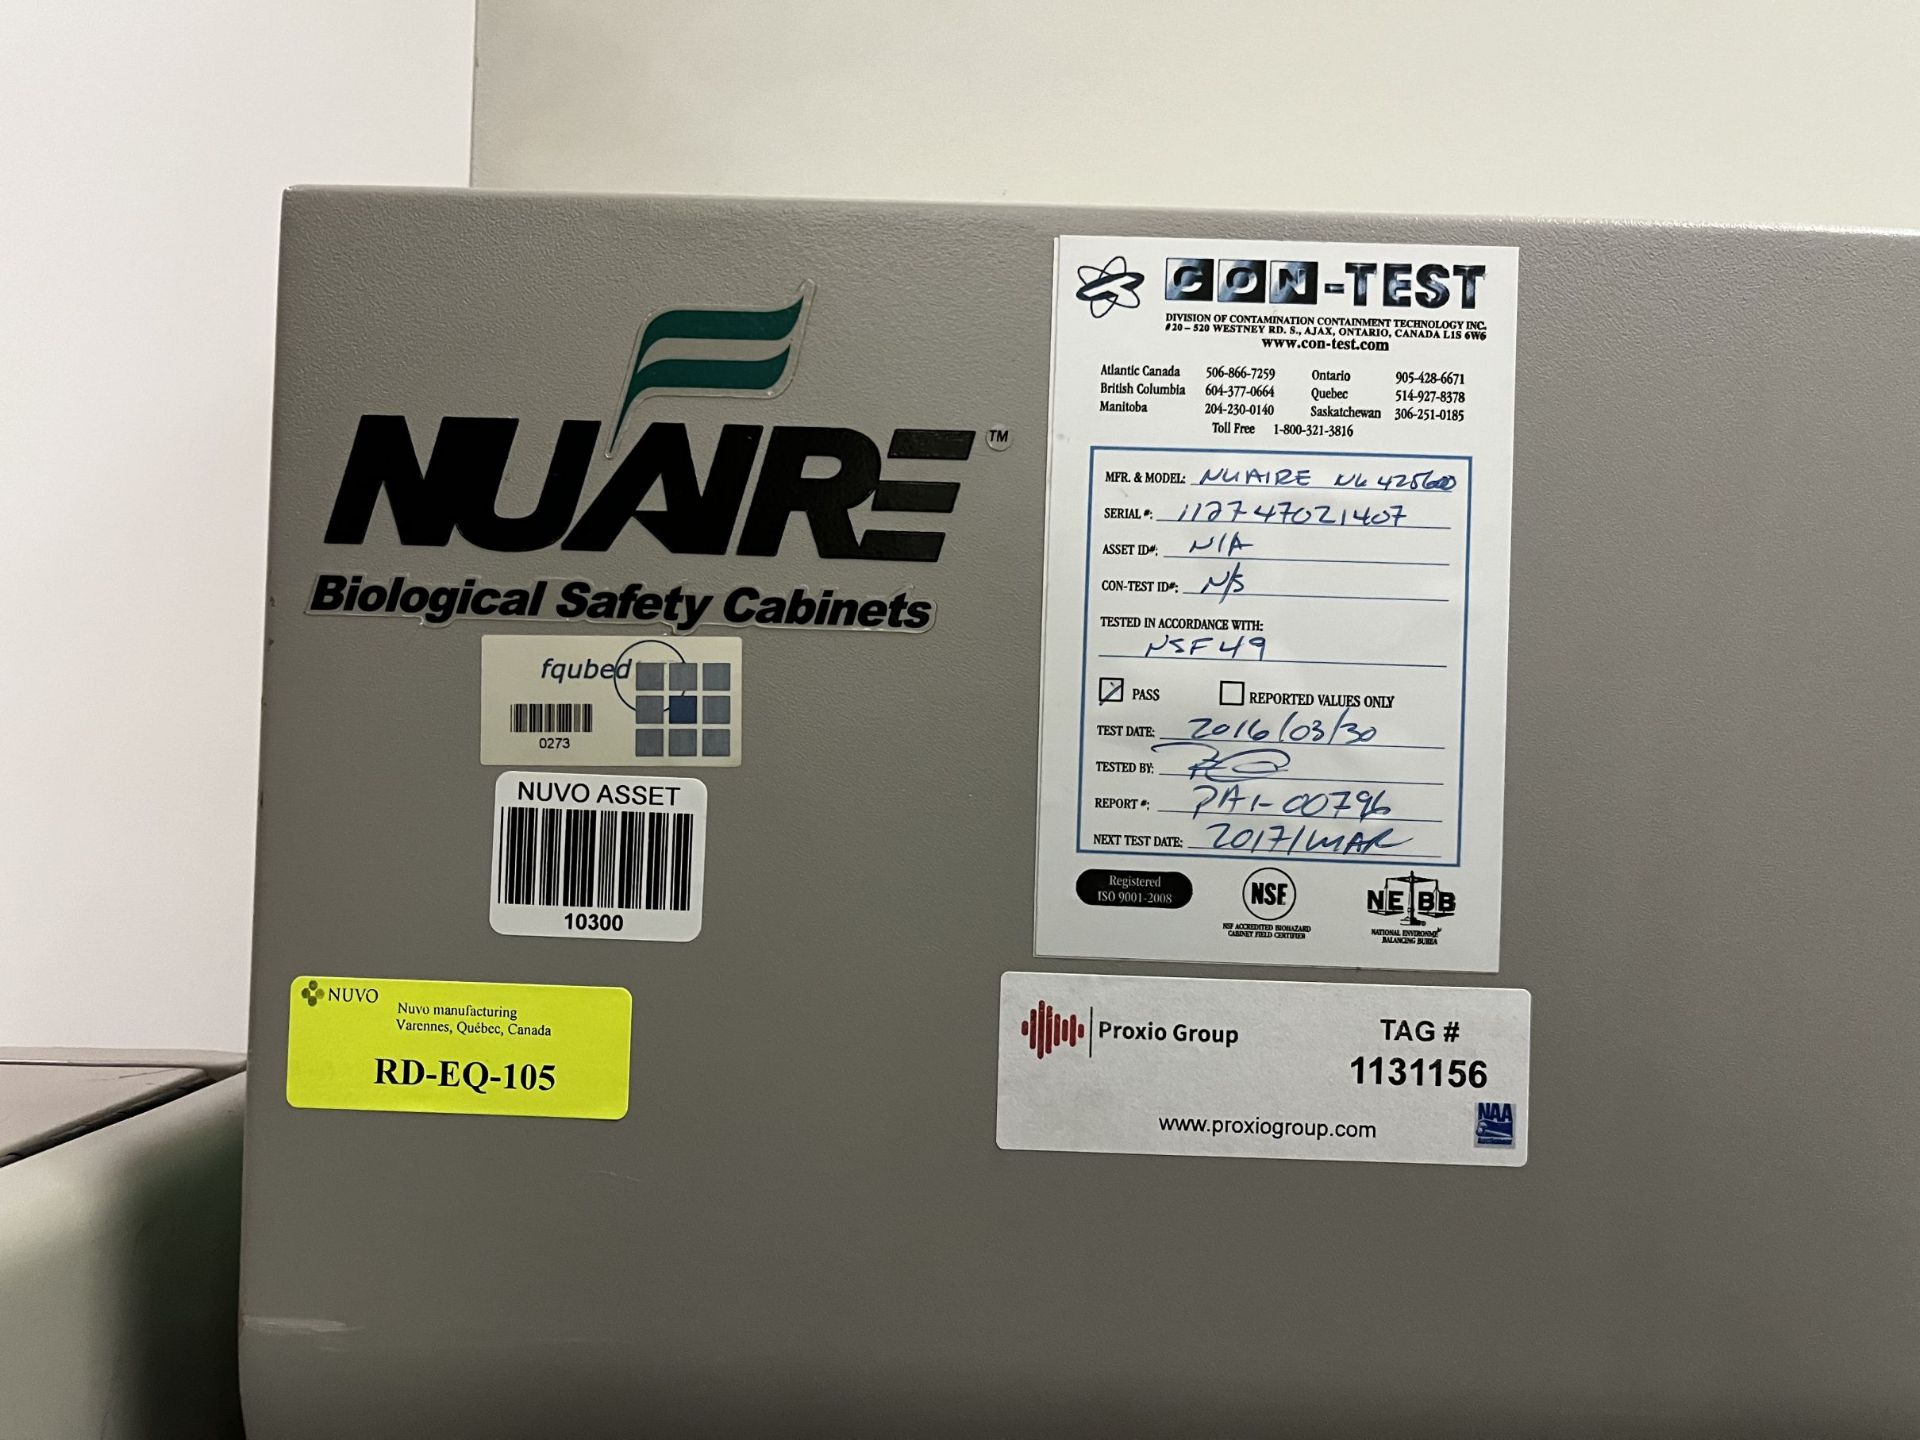 NUAIRE Biological Safety Cabinets - Image 6 of 7